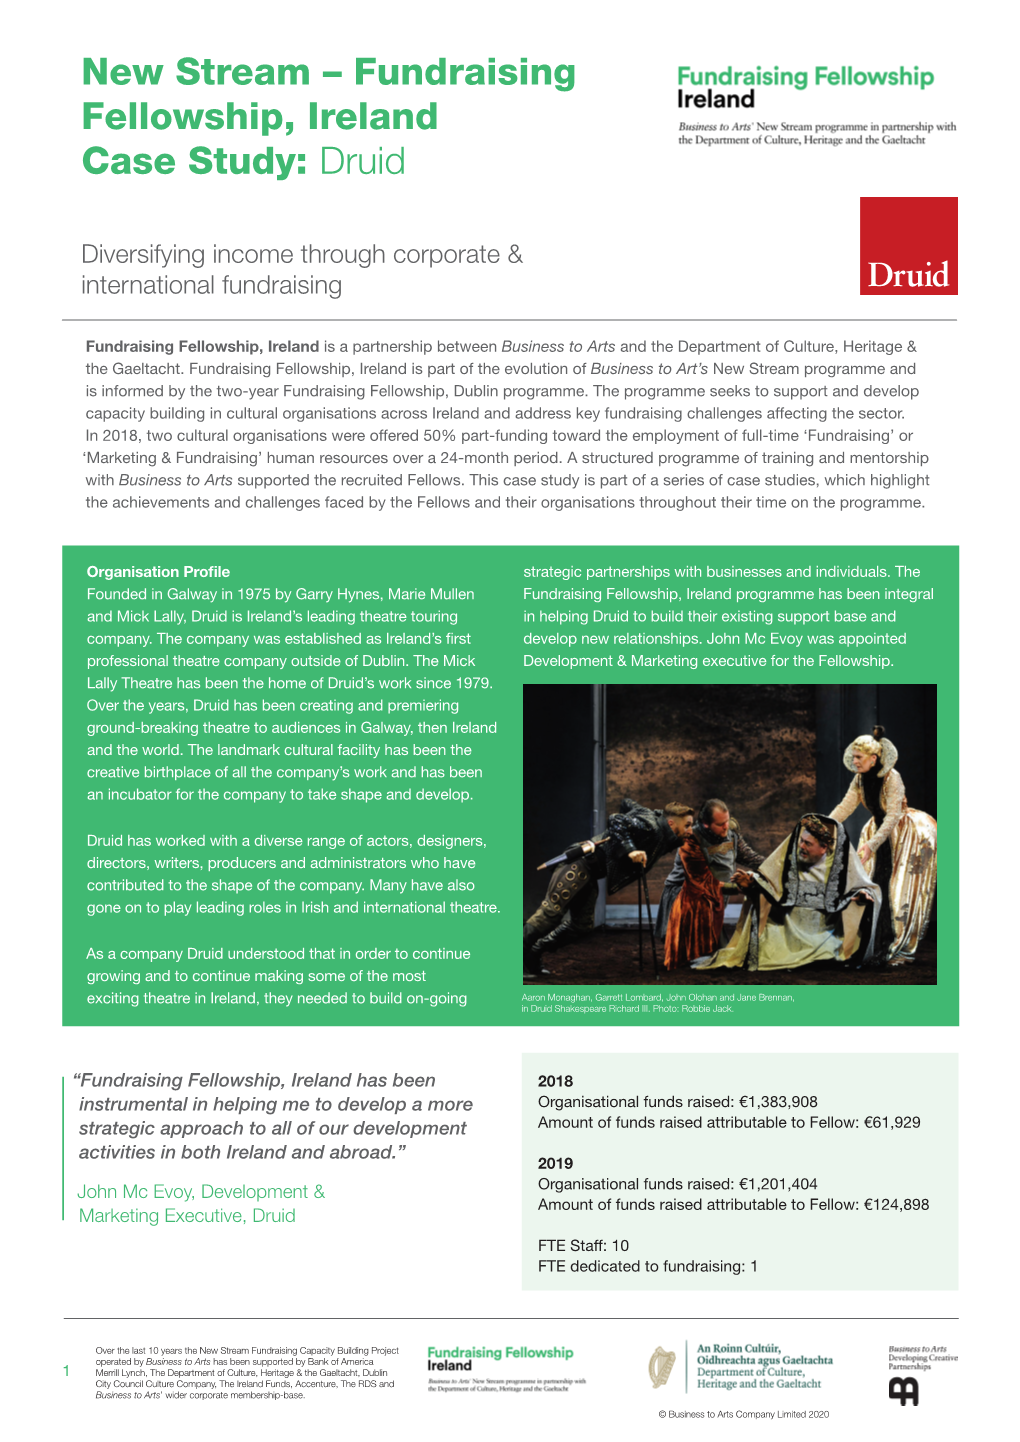 Our Work with Druid & Fundraising Fellowship, Ireland / Case Study